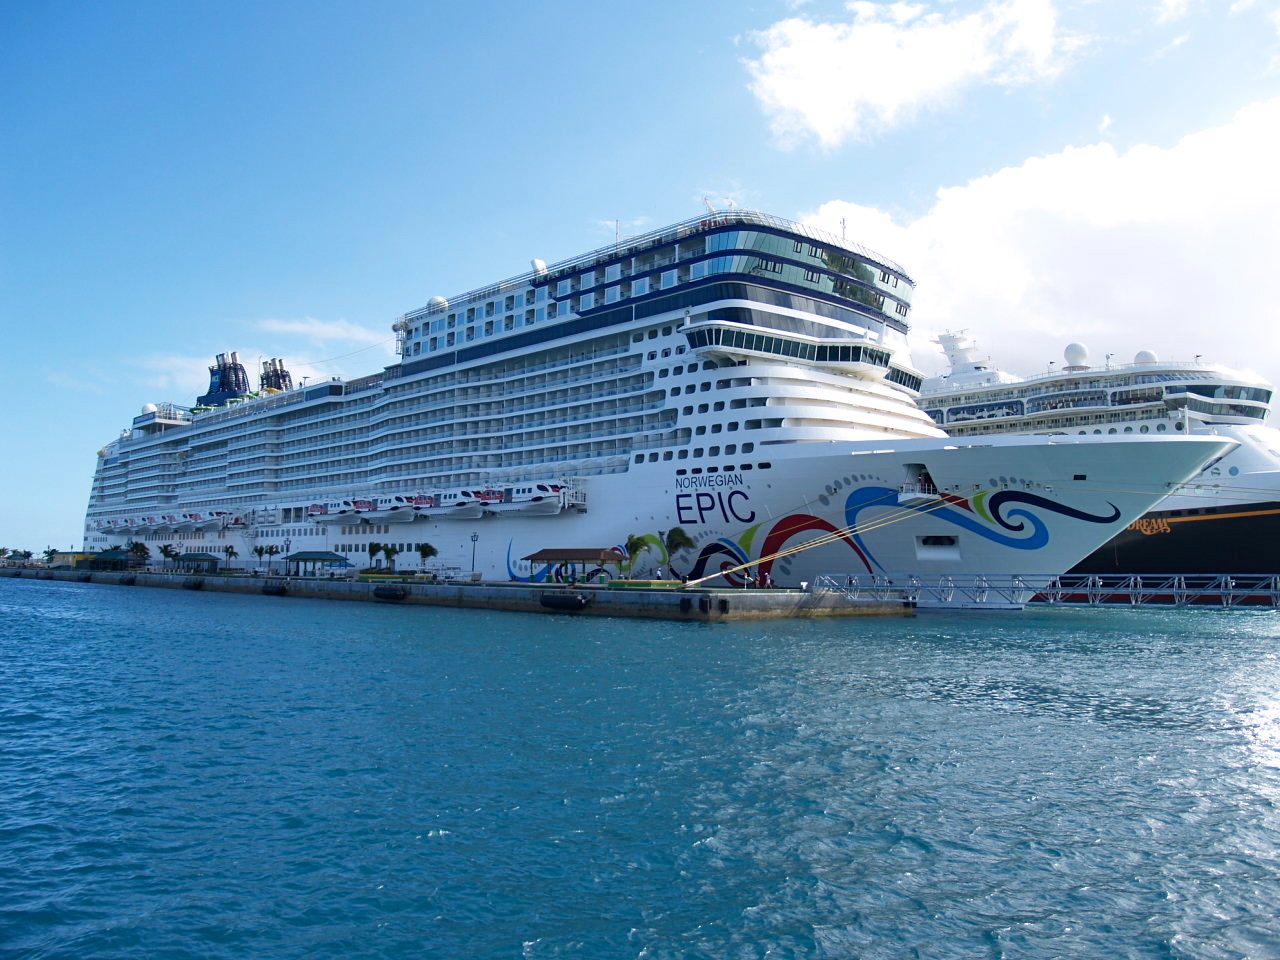 An epic cruise on the Norwegian "Epic"